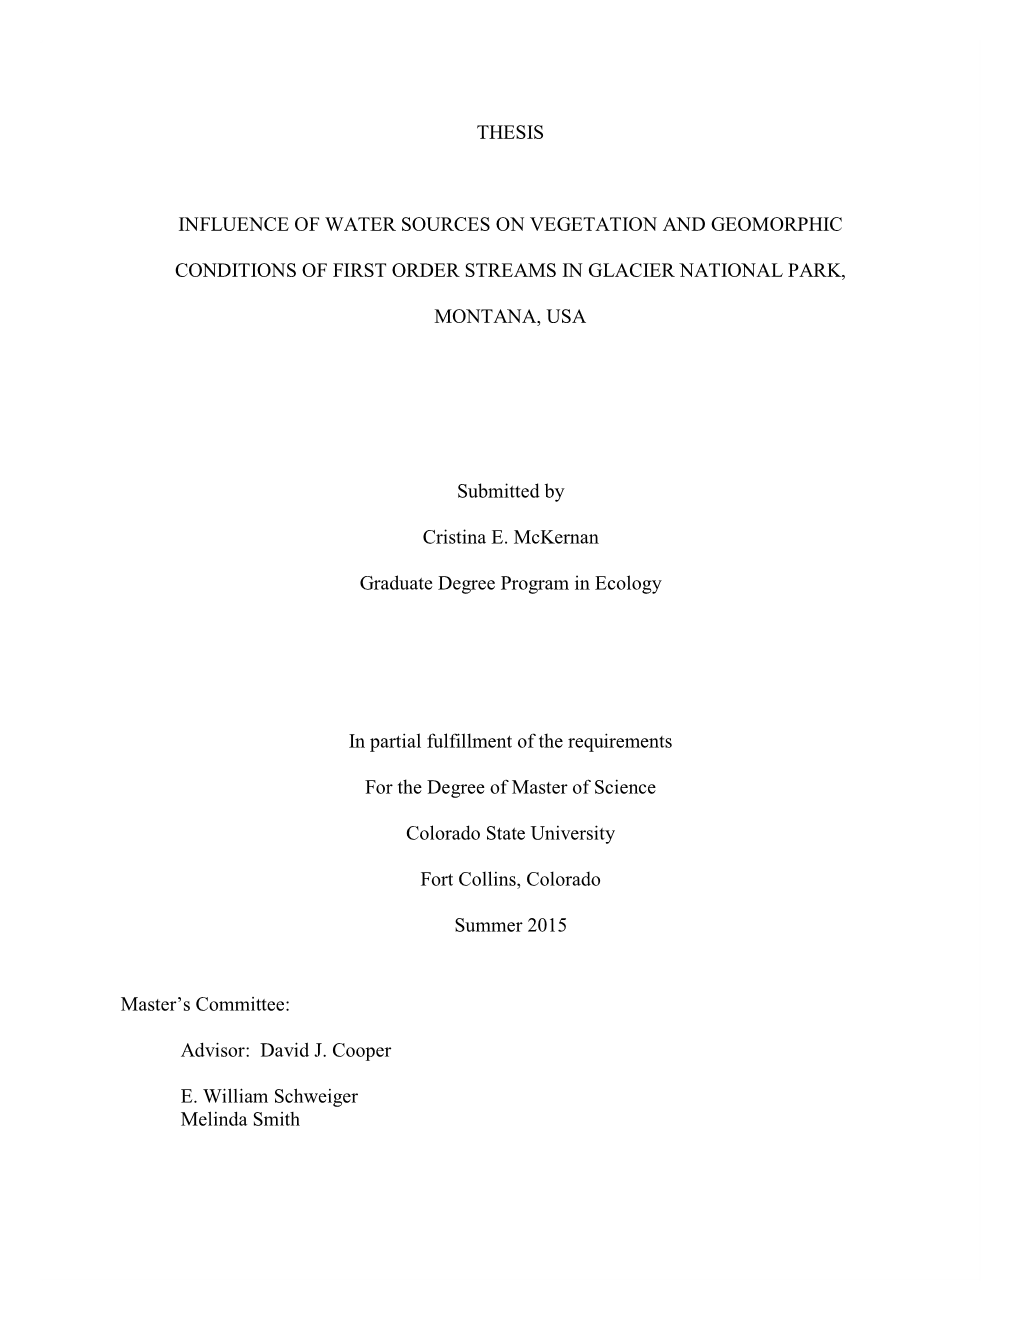 Thesis Influence of Water Sources on Vegetation And